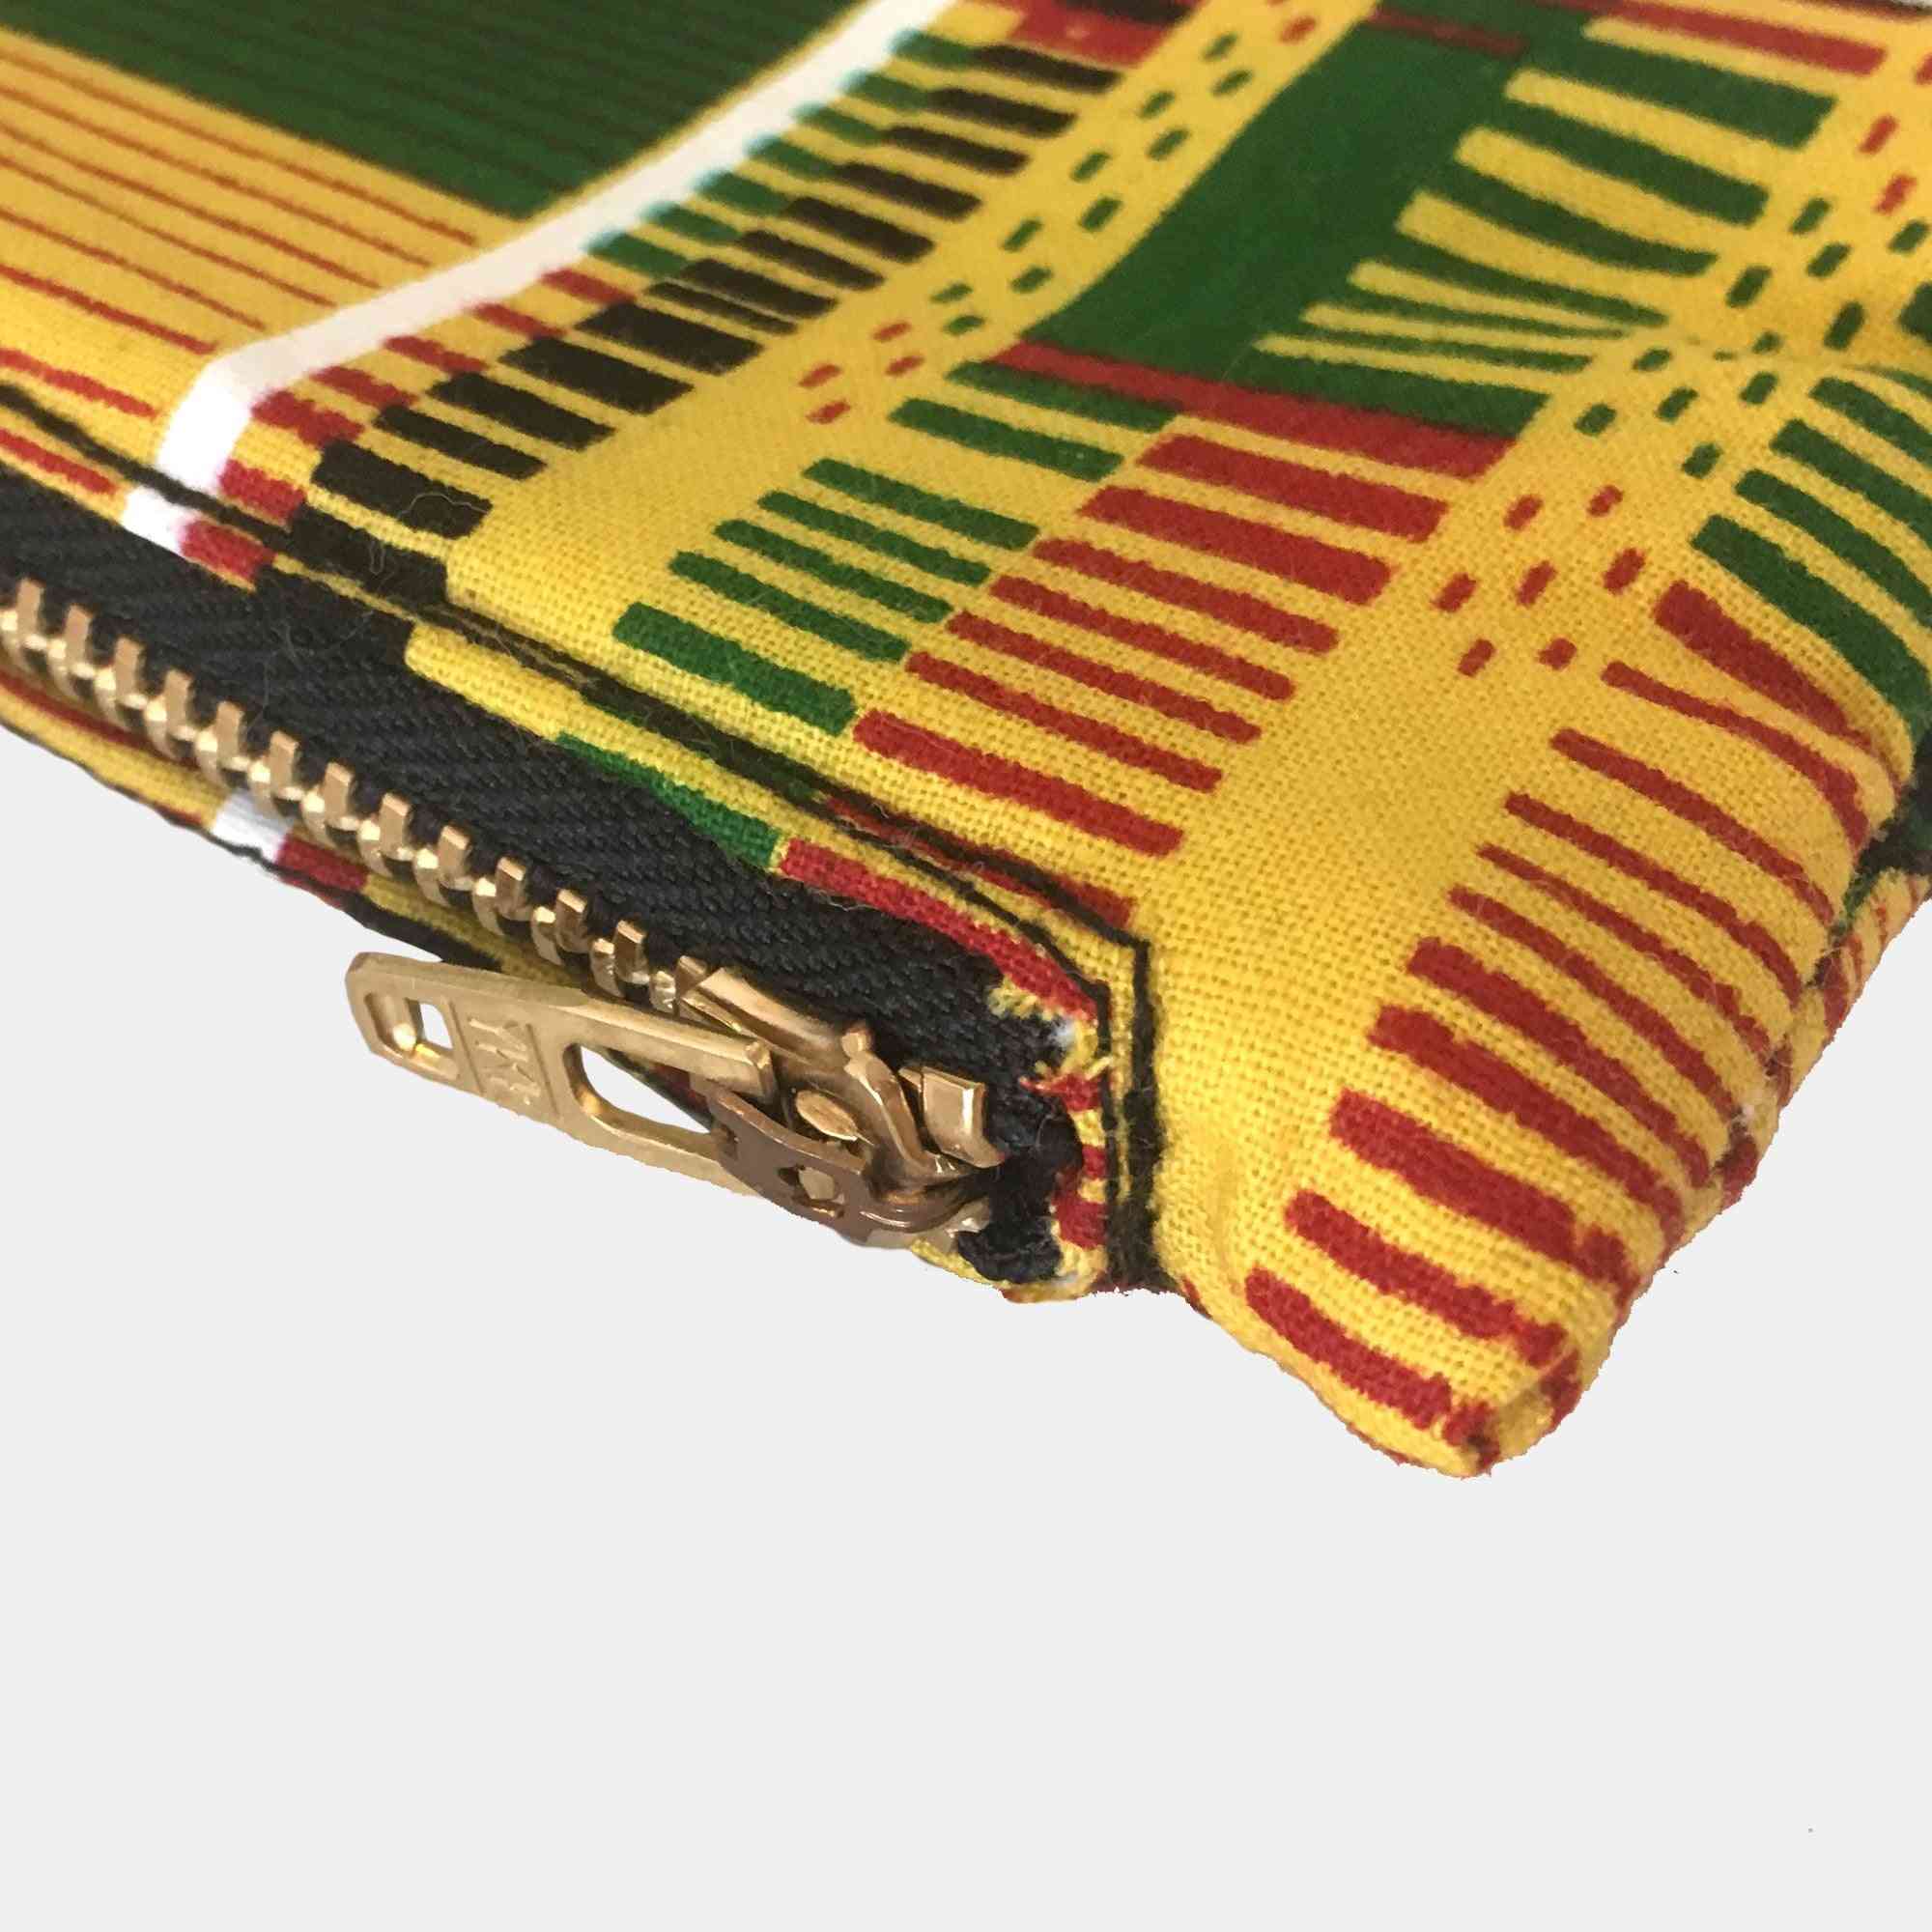 Hand Crafted Exotic African Motifs Wallet